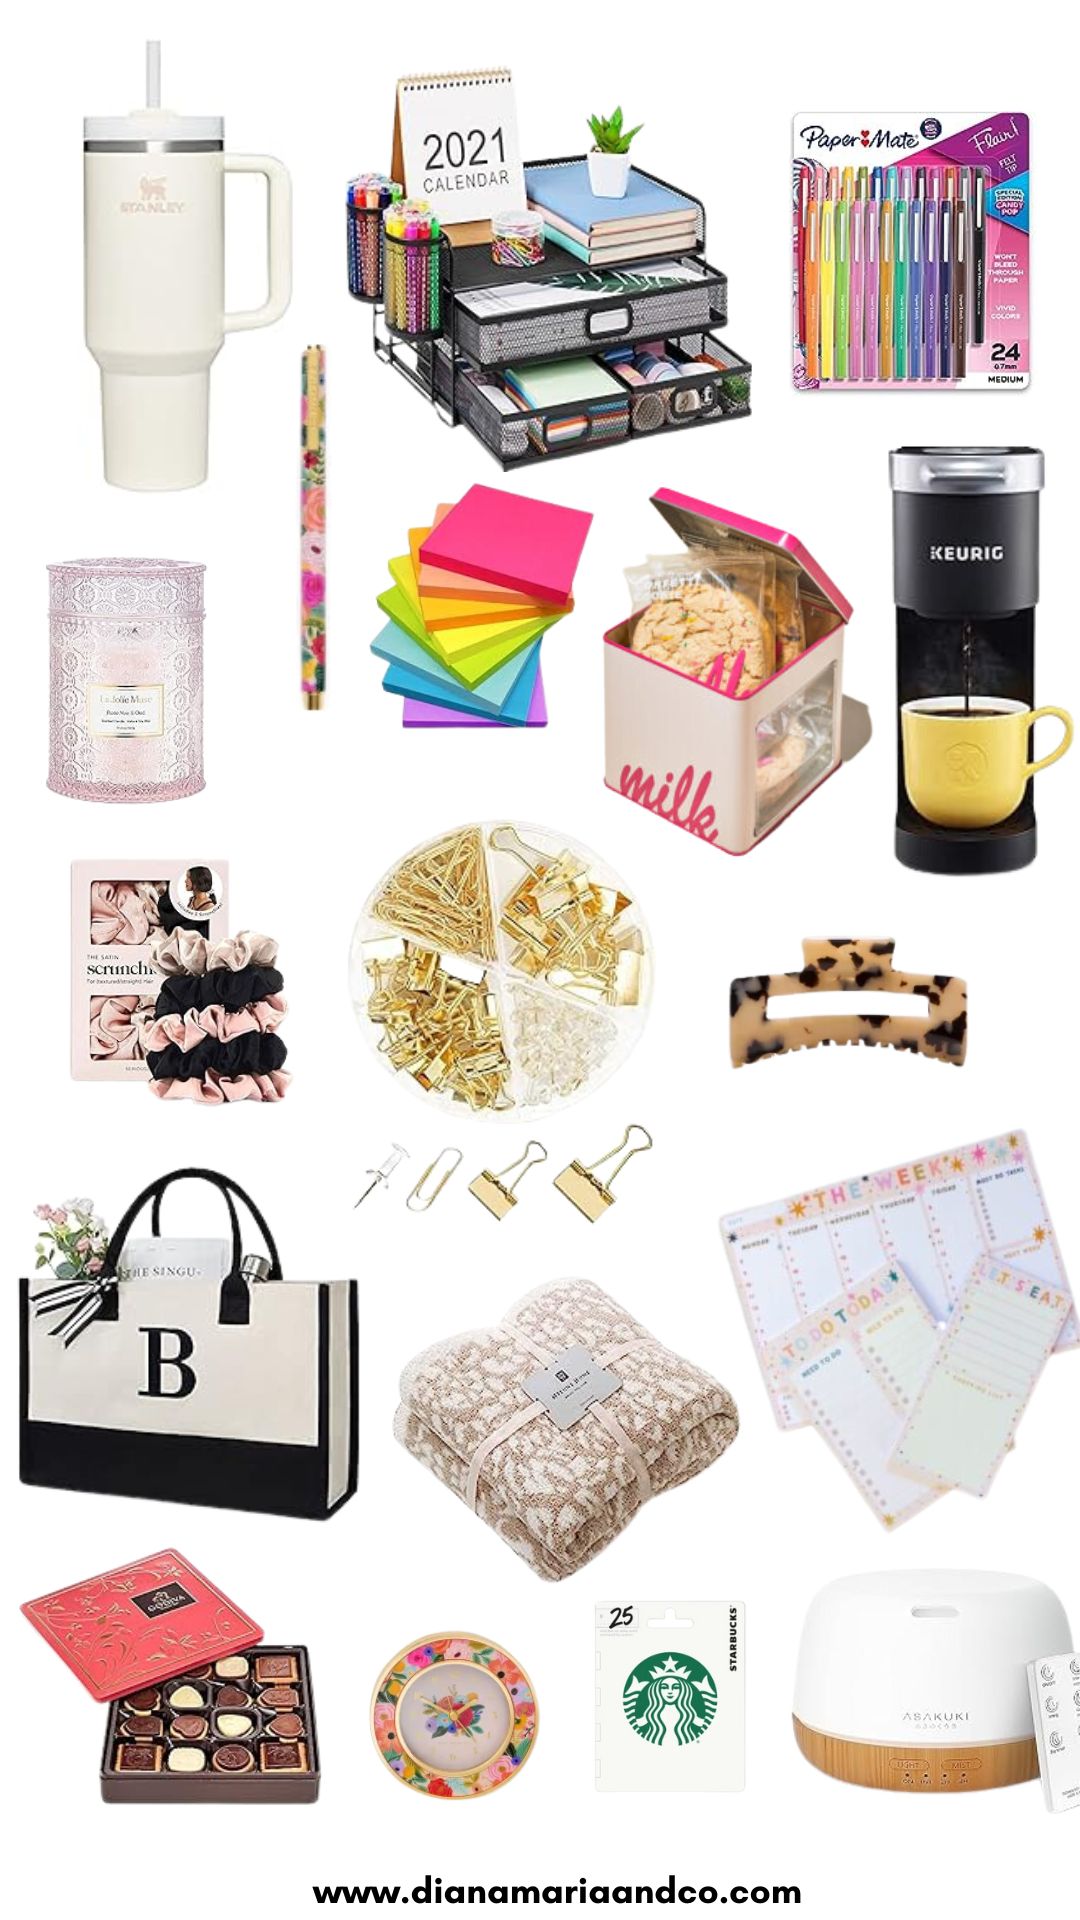 24 Thoughtful Christmas Gift Ideas for Women